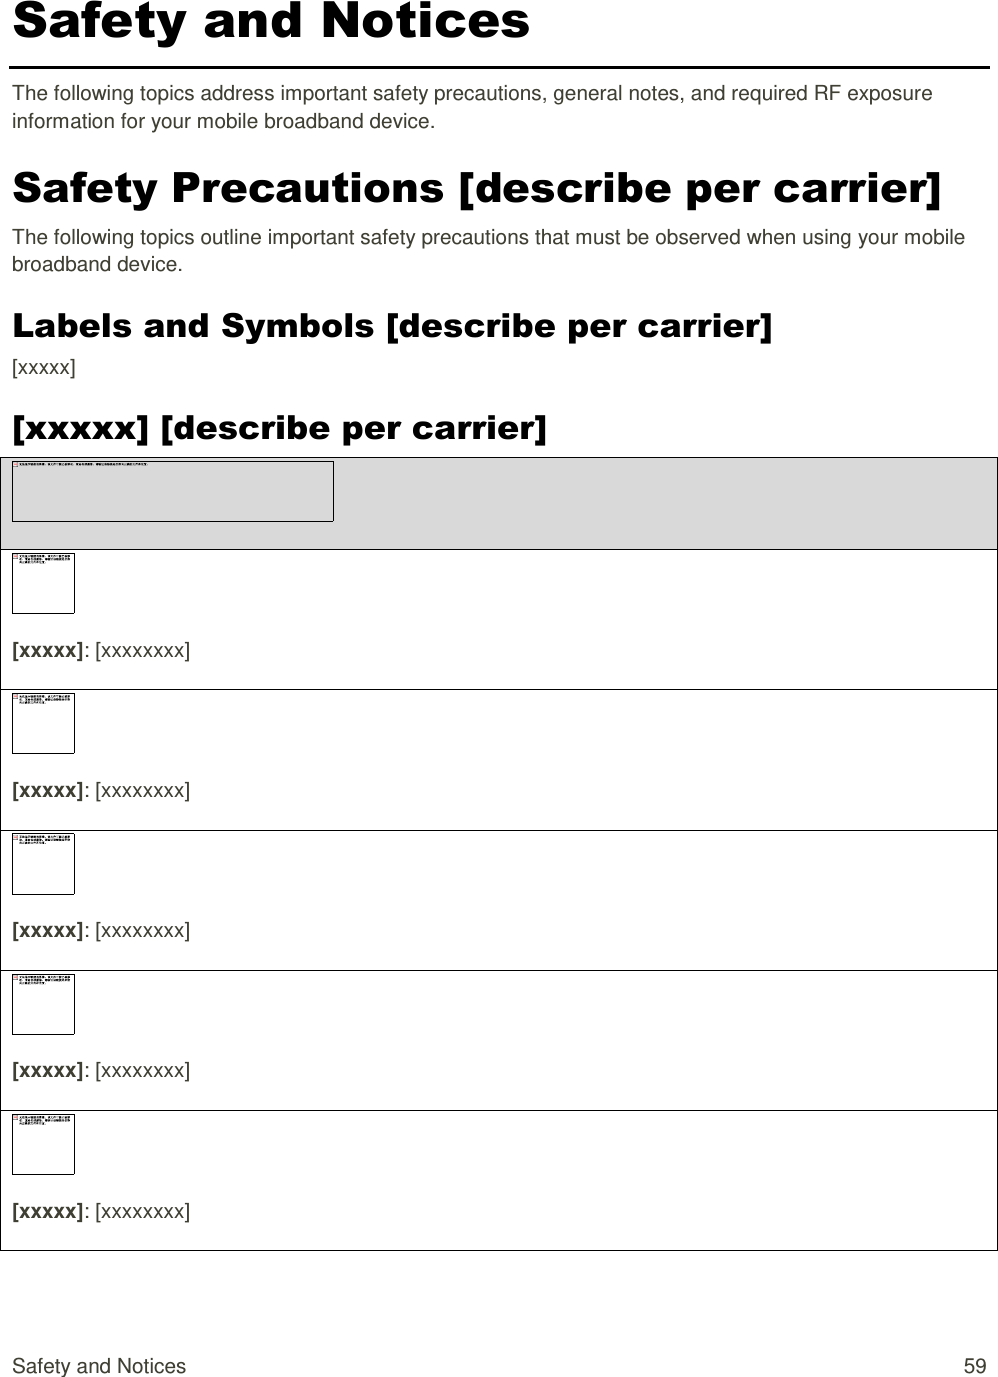 Safety and Notices  59 Safety and Notices  The following topics address important safety precautions, general notes, and required RF exposure information for your mobile broadband device. Safety Precautions [describe per carrier] The following topics outline important safety precautions that must be observed when using your mobile broadband device. Labels and Symbols [describe per carrier] [xxxxx] [xxxxx] [describe per carrier]   [xxxxx]: [xxxxxxxx]  [xxxxx]: [xxxxxxxx]  [xxxxx]: [xxxxxxxx]  [xxxxx]: [xxxxxxxx]  [xxxxx]: [xxxxxxxx]  